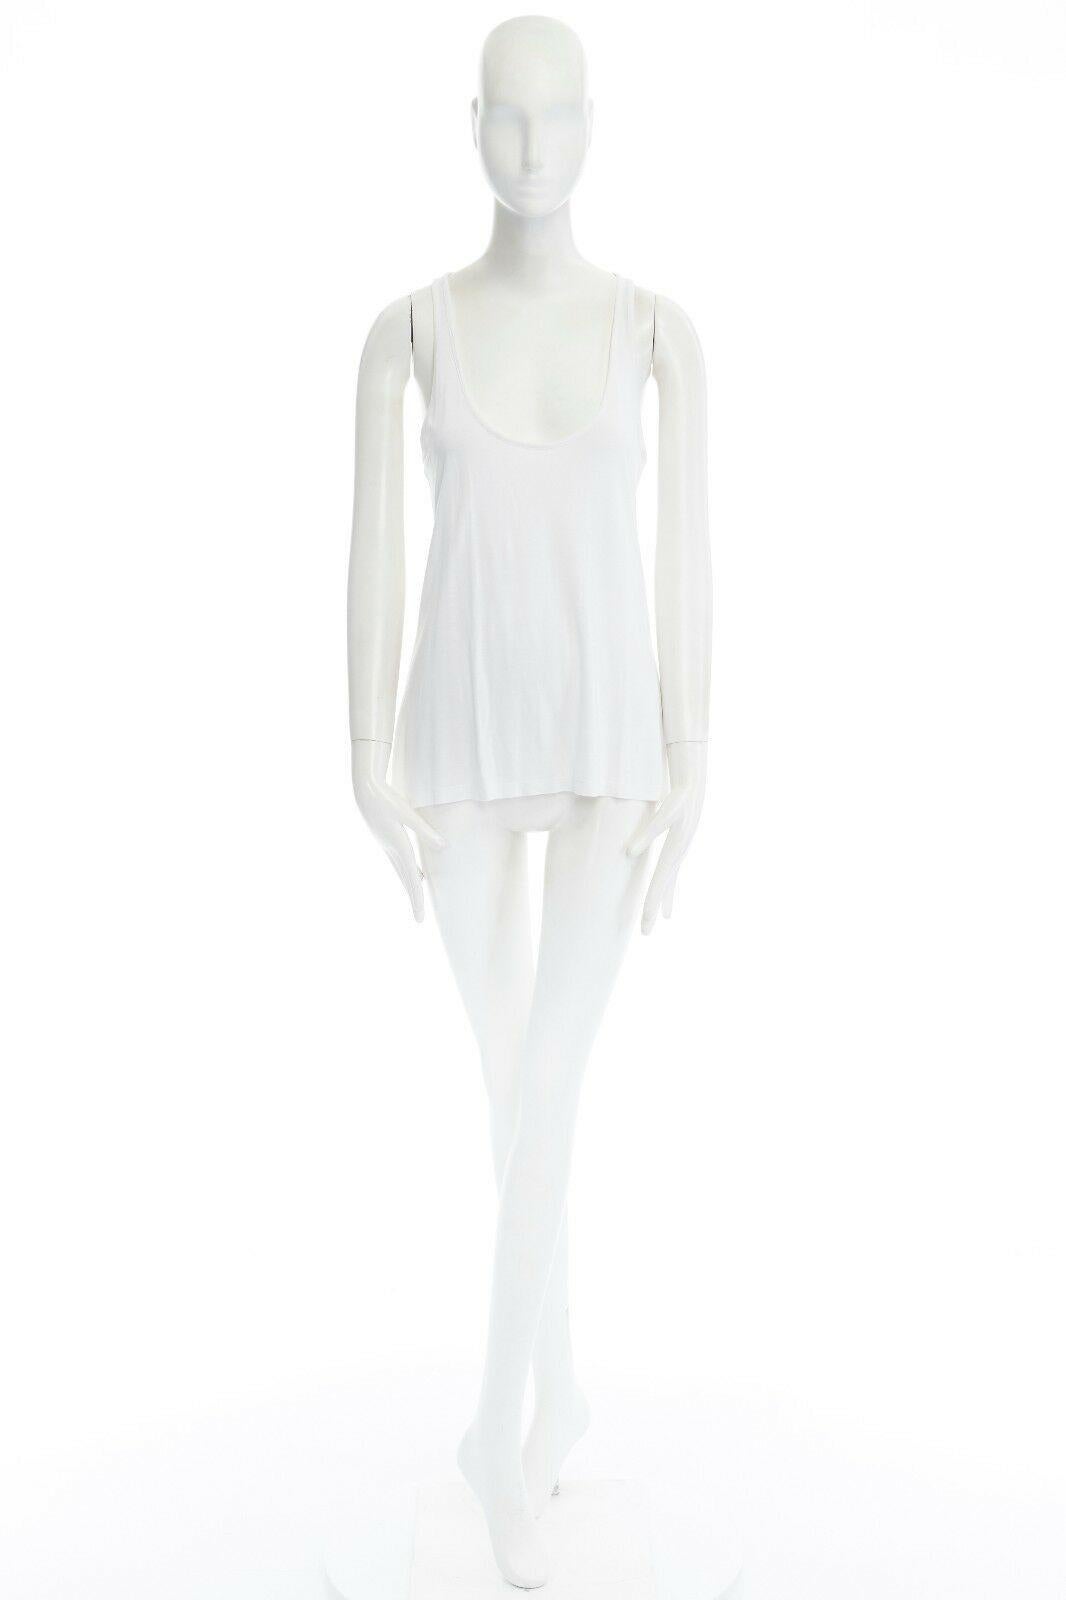 GIVENCHY TISCI white viscose silk white scoop neck tank top S 
Reference: LNKO/A00616 
Brand: Givenchy 
Designer: Riccardo Tisci 
Material: Viscose 
Color: White 
Pattern: Solid 
Extra Detail: Viscose, silk. Simple tank top. Scoop neckline.